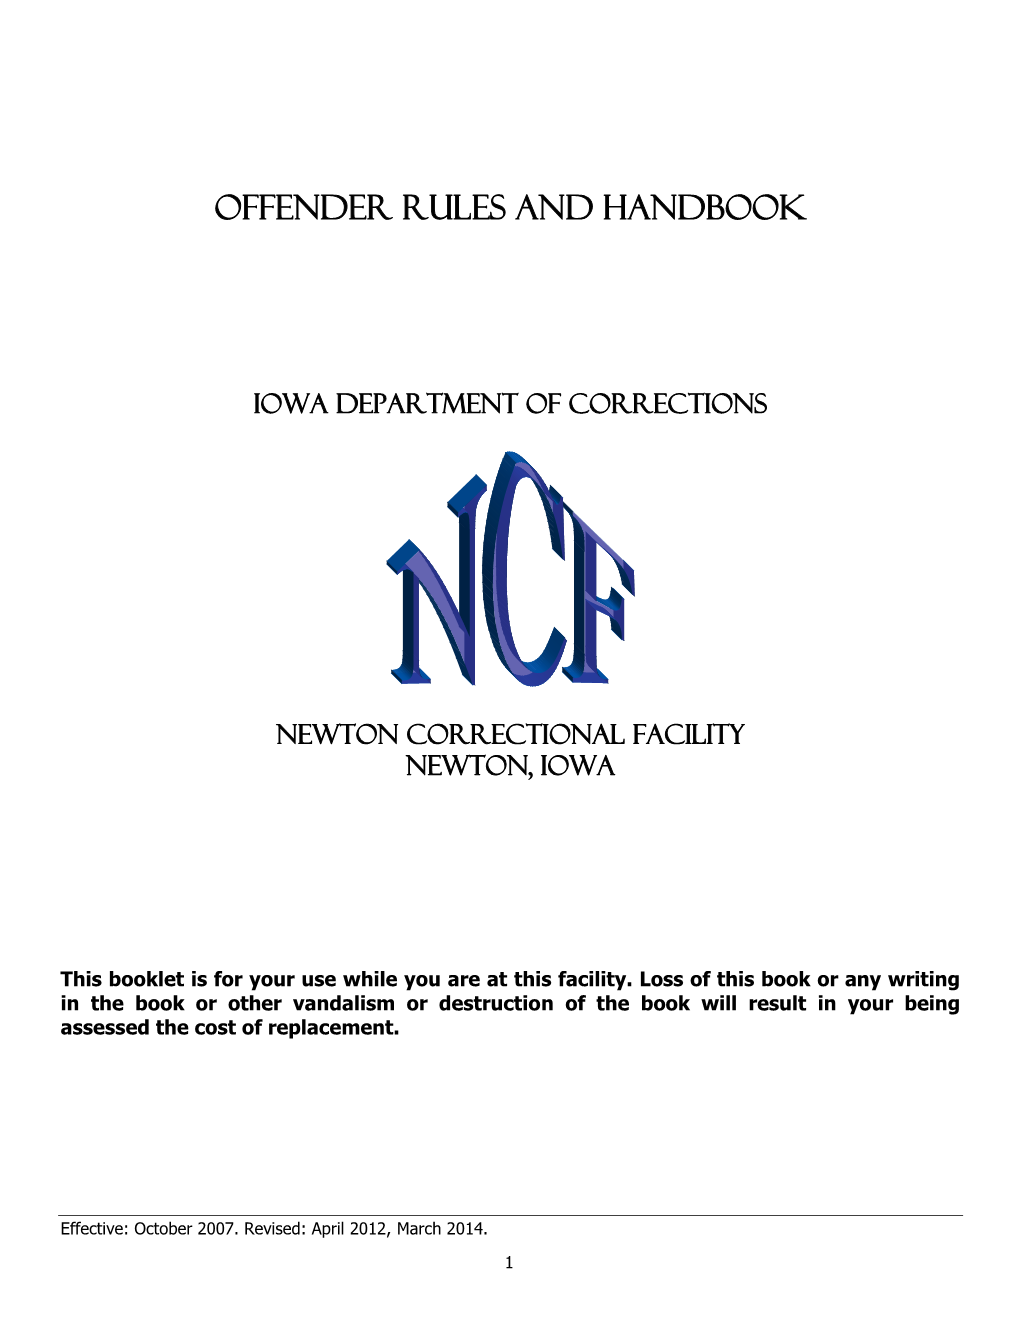 Offender Rules and Handbook